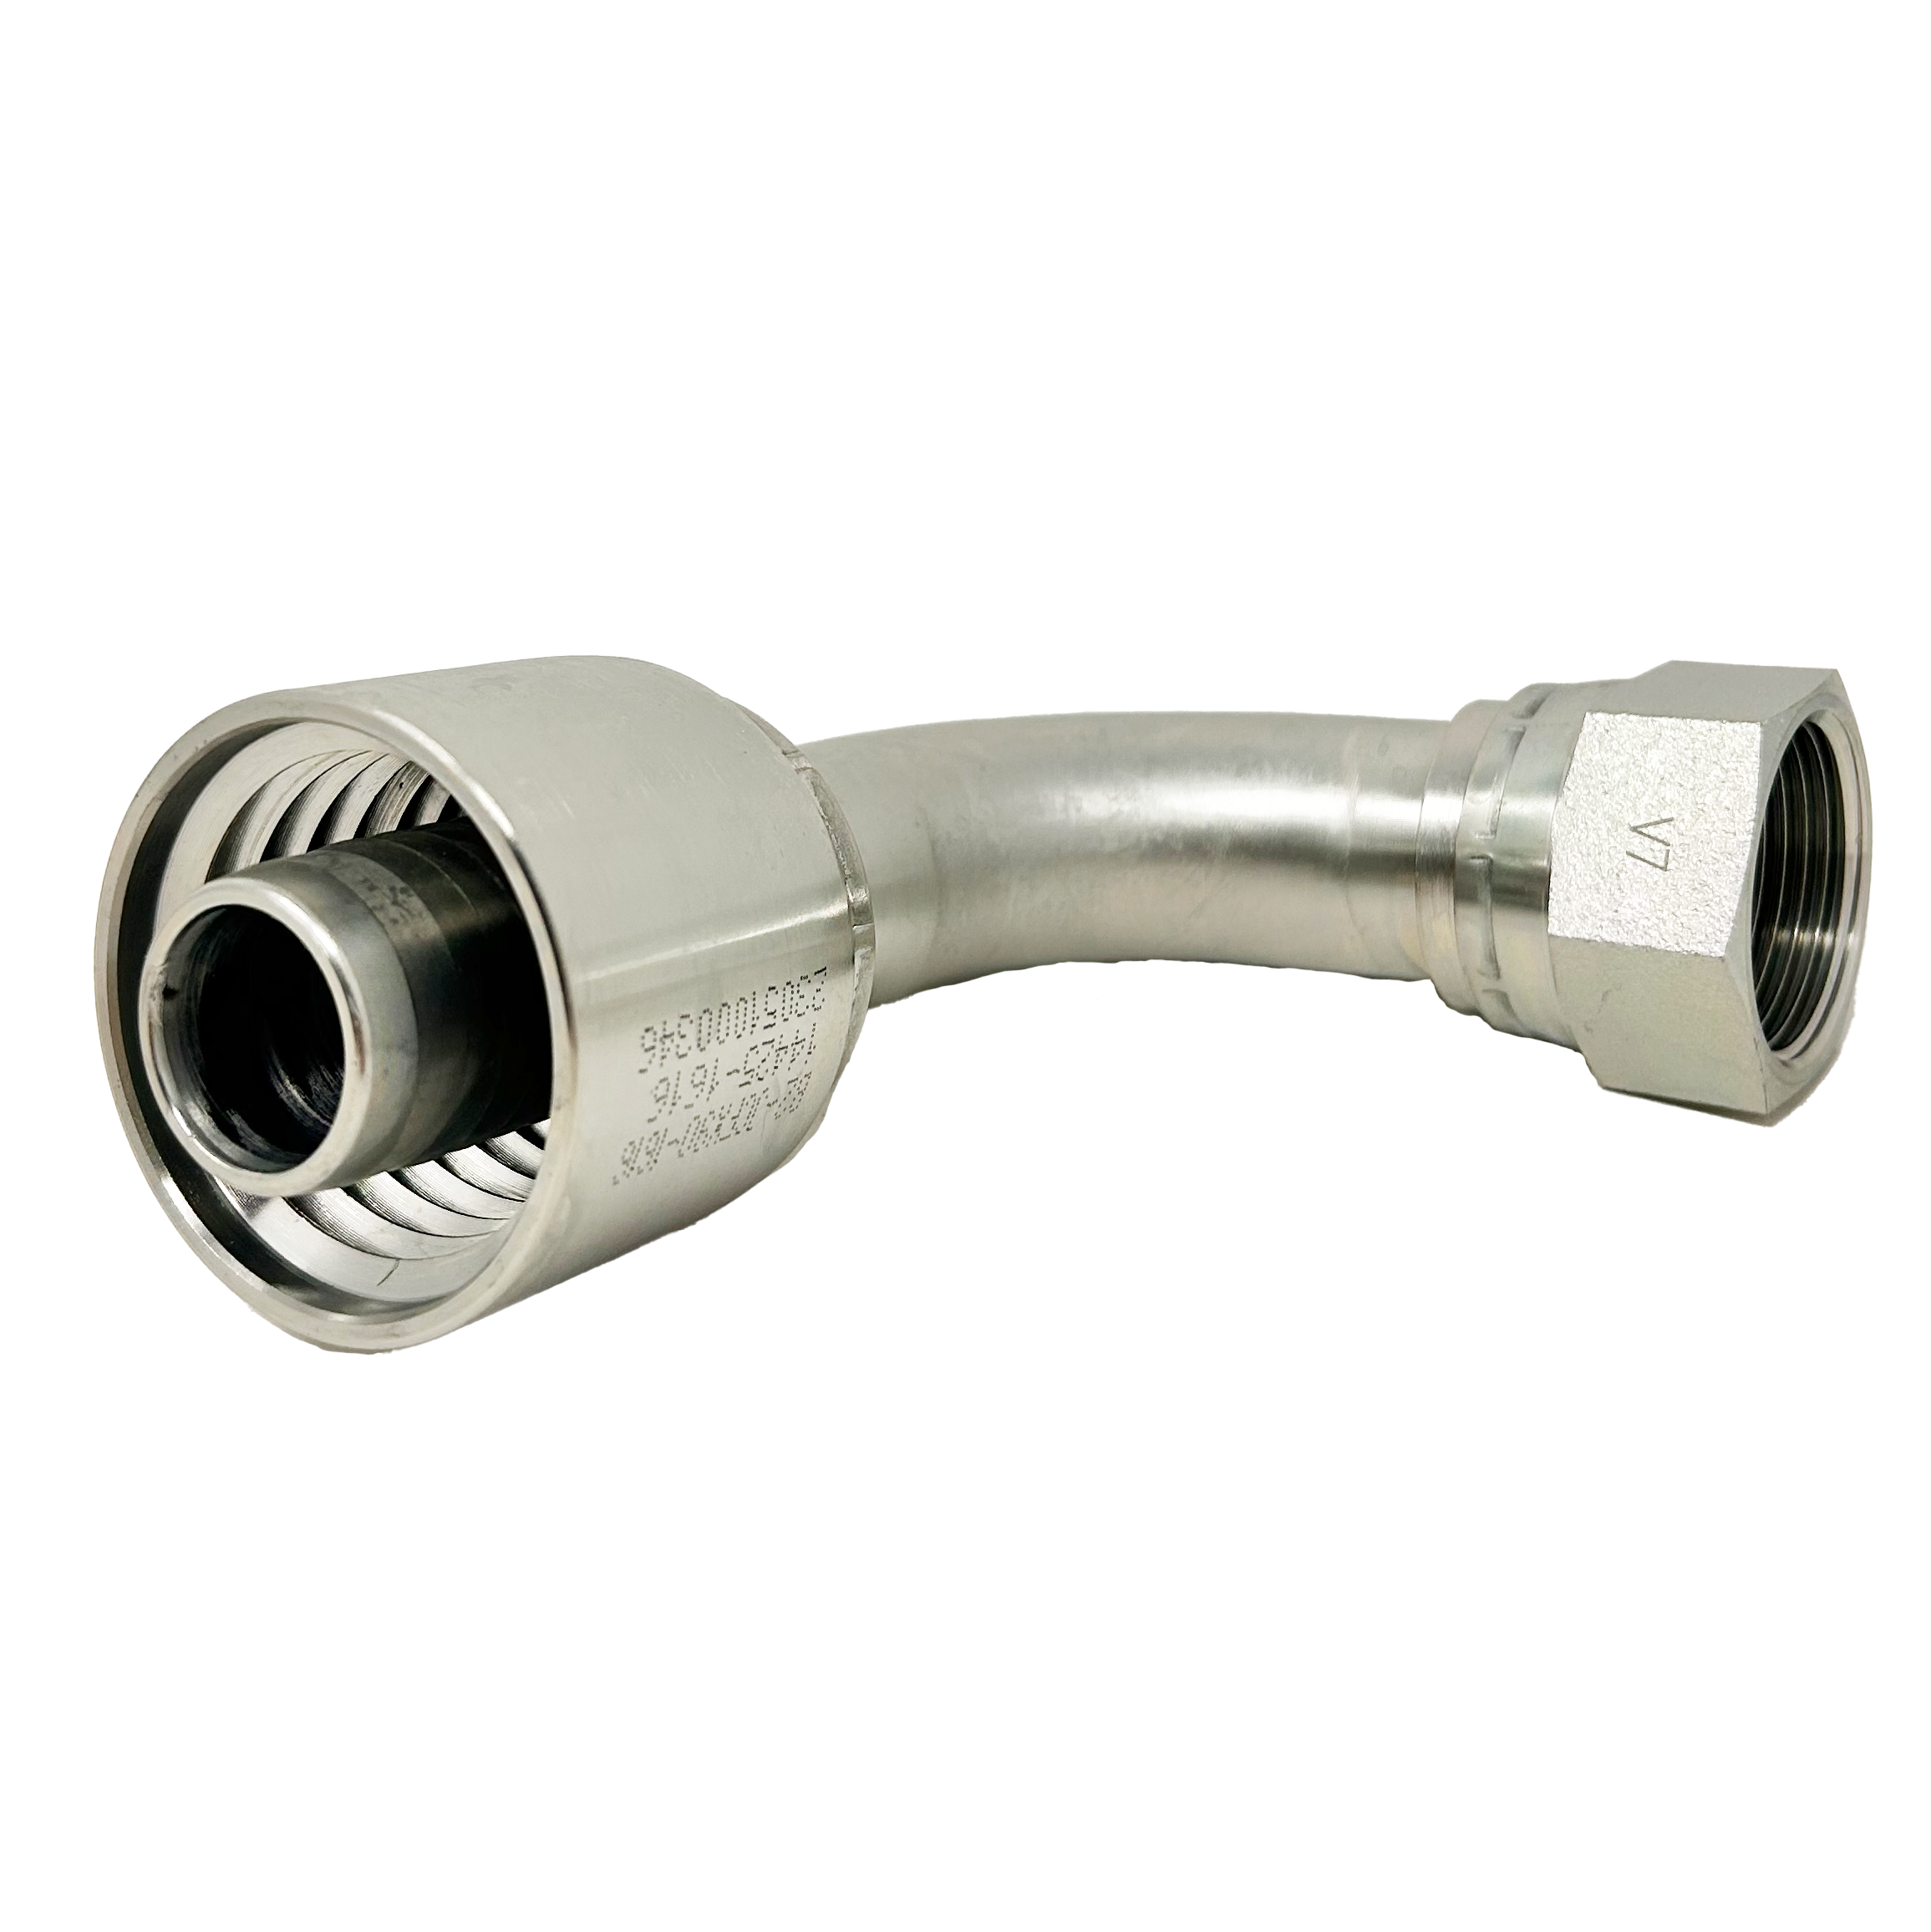 B2-JCFX90-0406: Continental Hose Fitting, 0.25 (1/4") Hose ID x 9/16-18 Female JIC, 90-Degree Swivel Connection